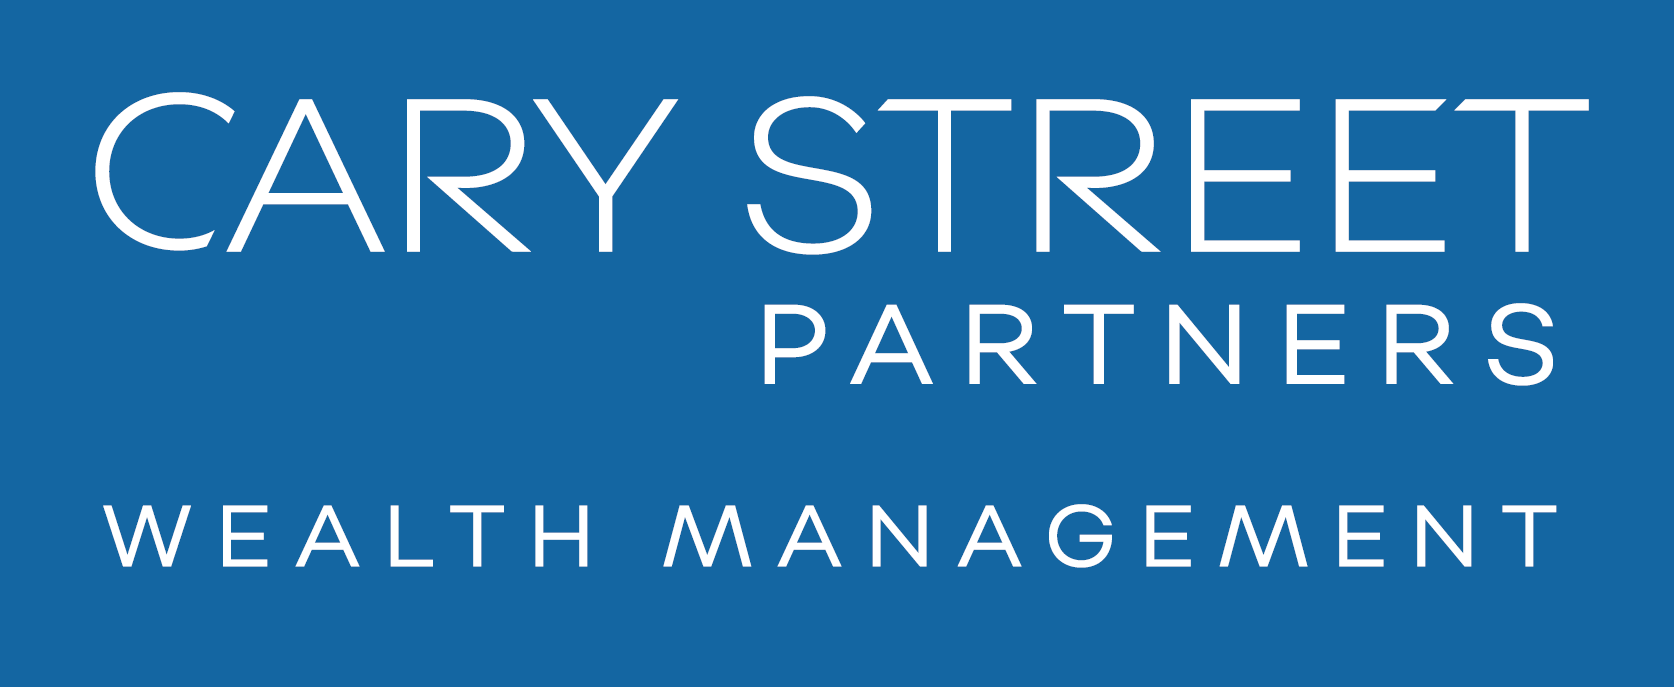 Cary Street Partners Logo.png